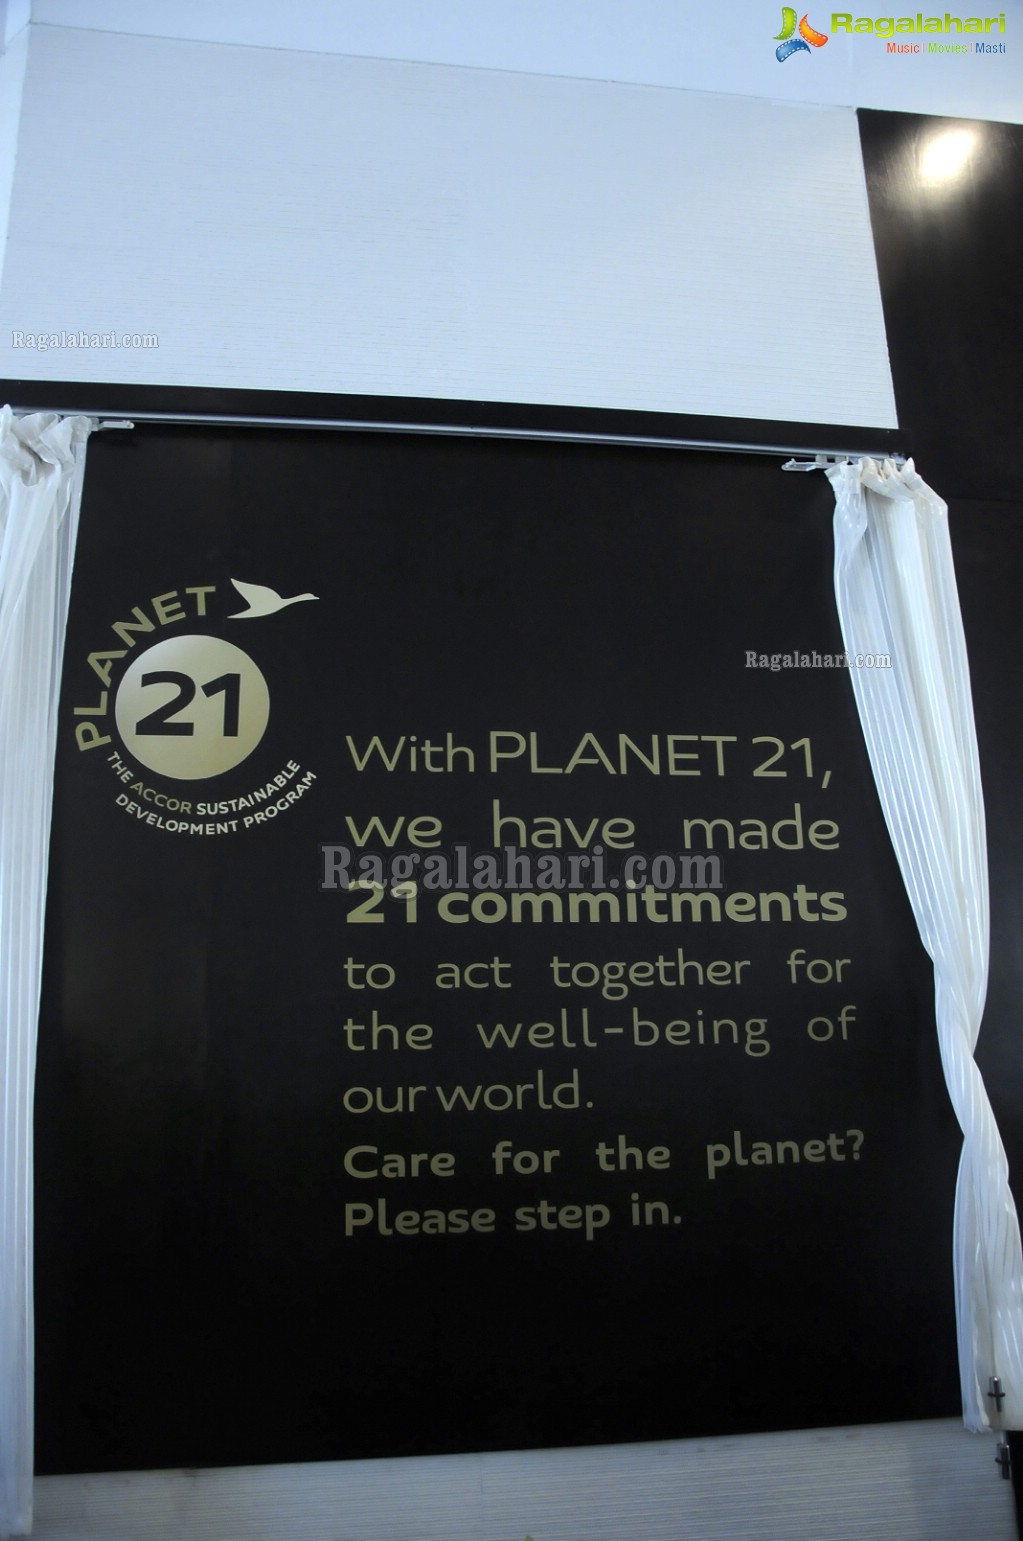 Accor launches Planet 21